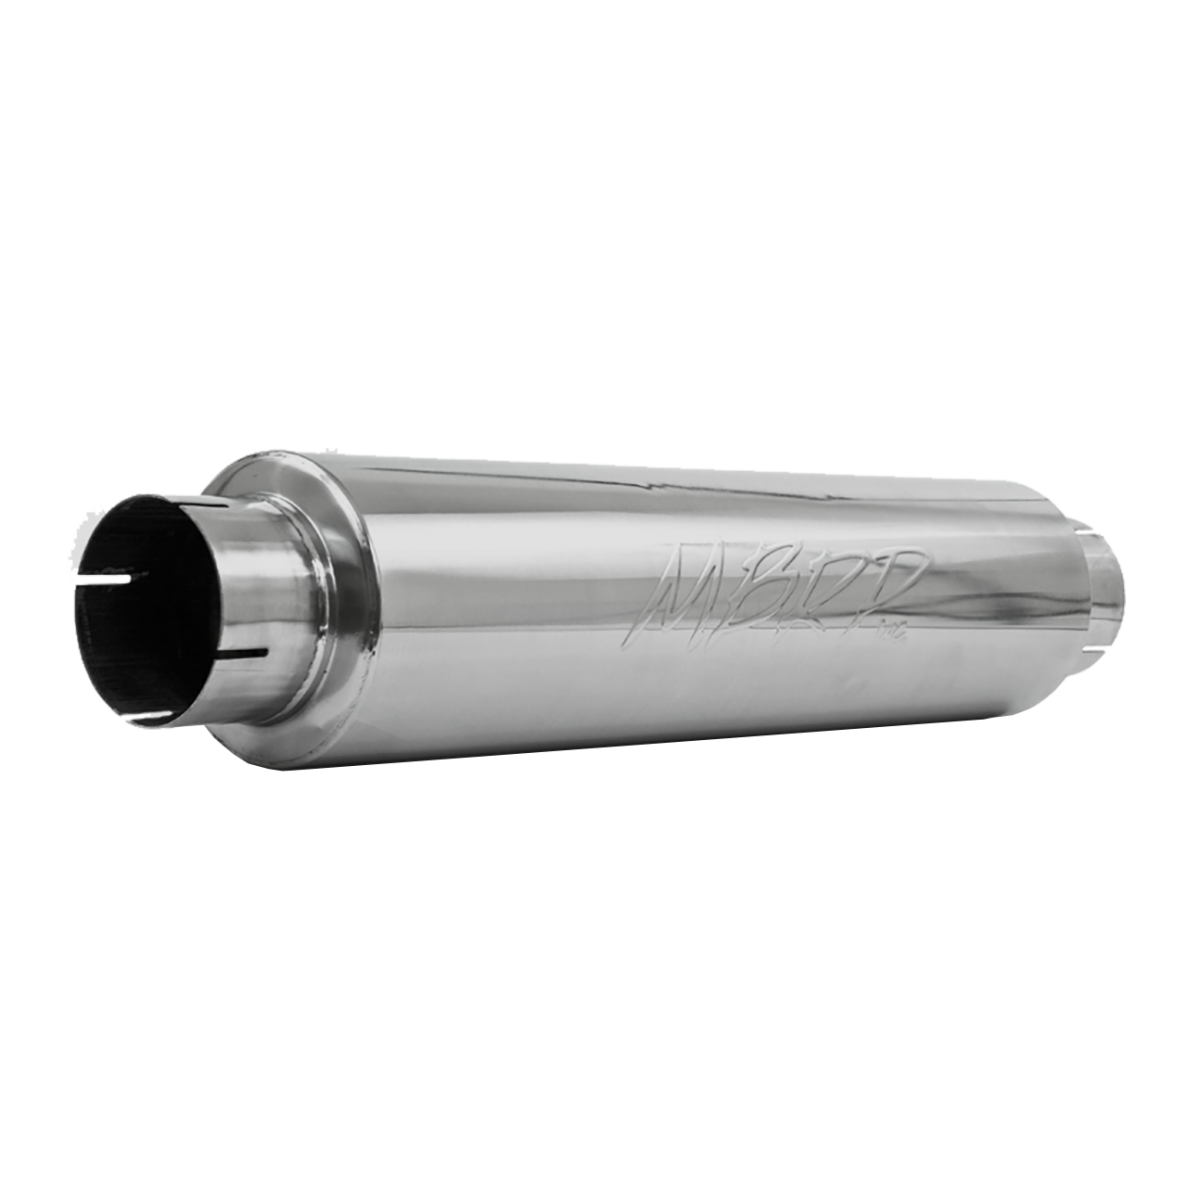 MBRP - MBRP 4 Inch Inlet/Outlet Quiet Tone Exhaust Muffler 24 Inch Body 6 Inch Diameter 30 Inch Overall T409 Stainless Steel M1004S